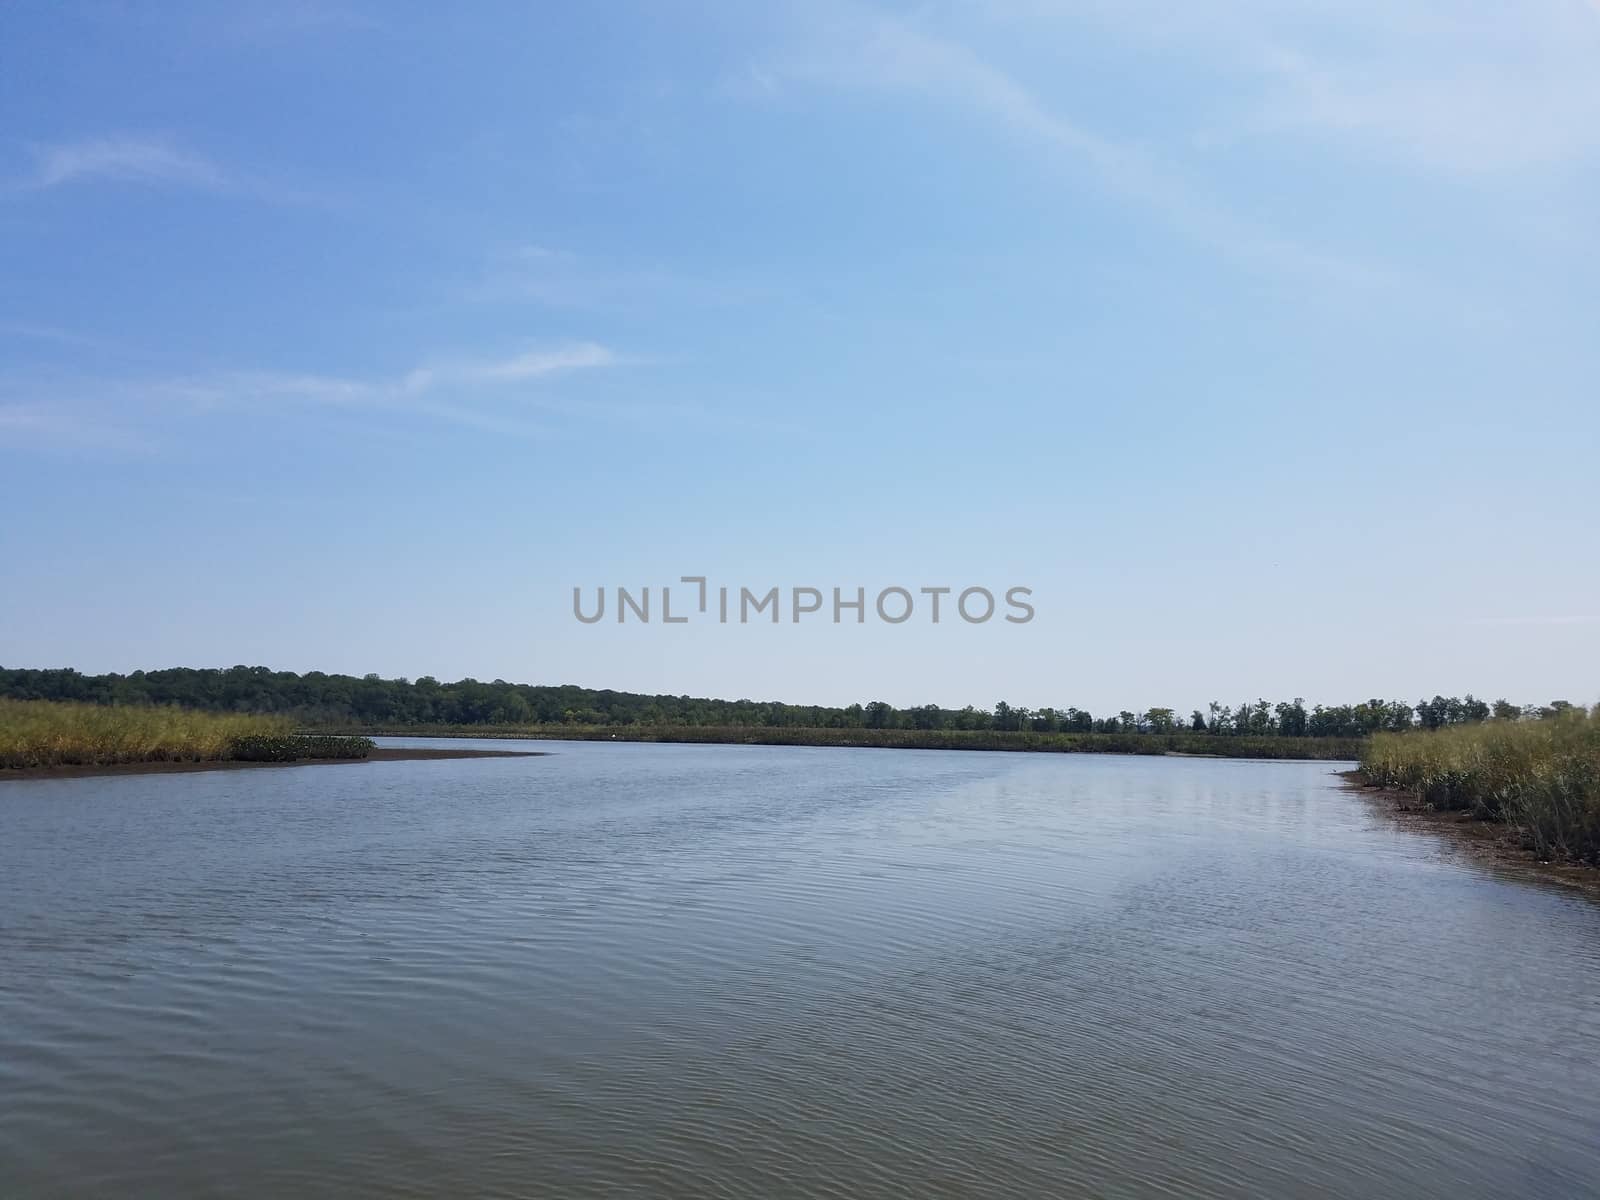 river or lake water and blue sky and grass by stockphotofan1